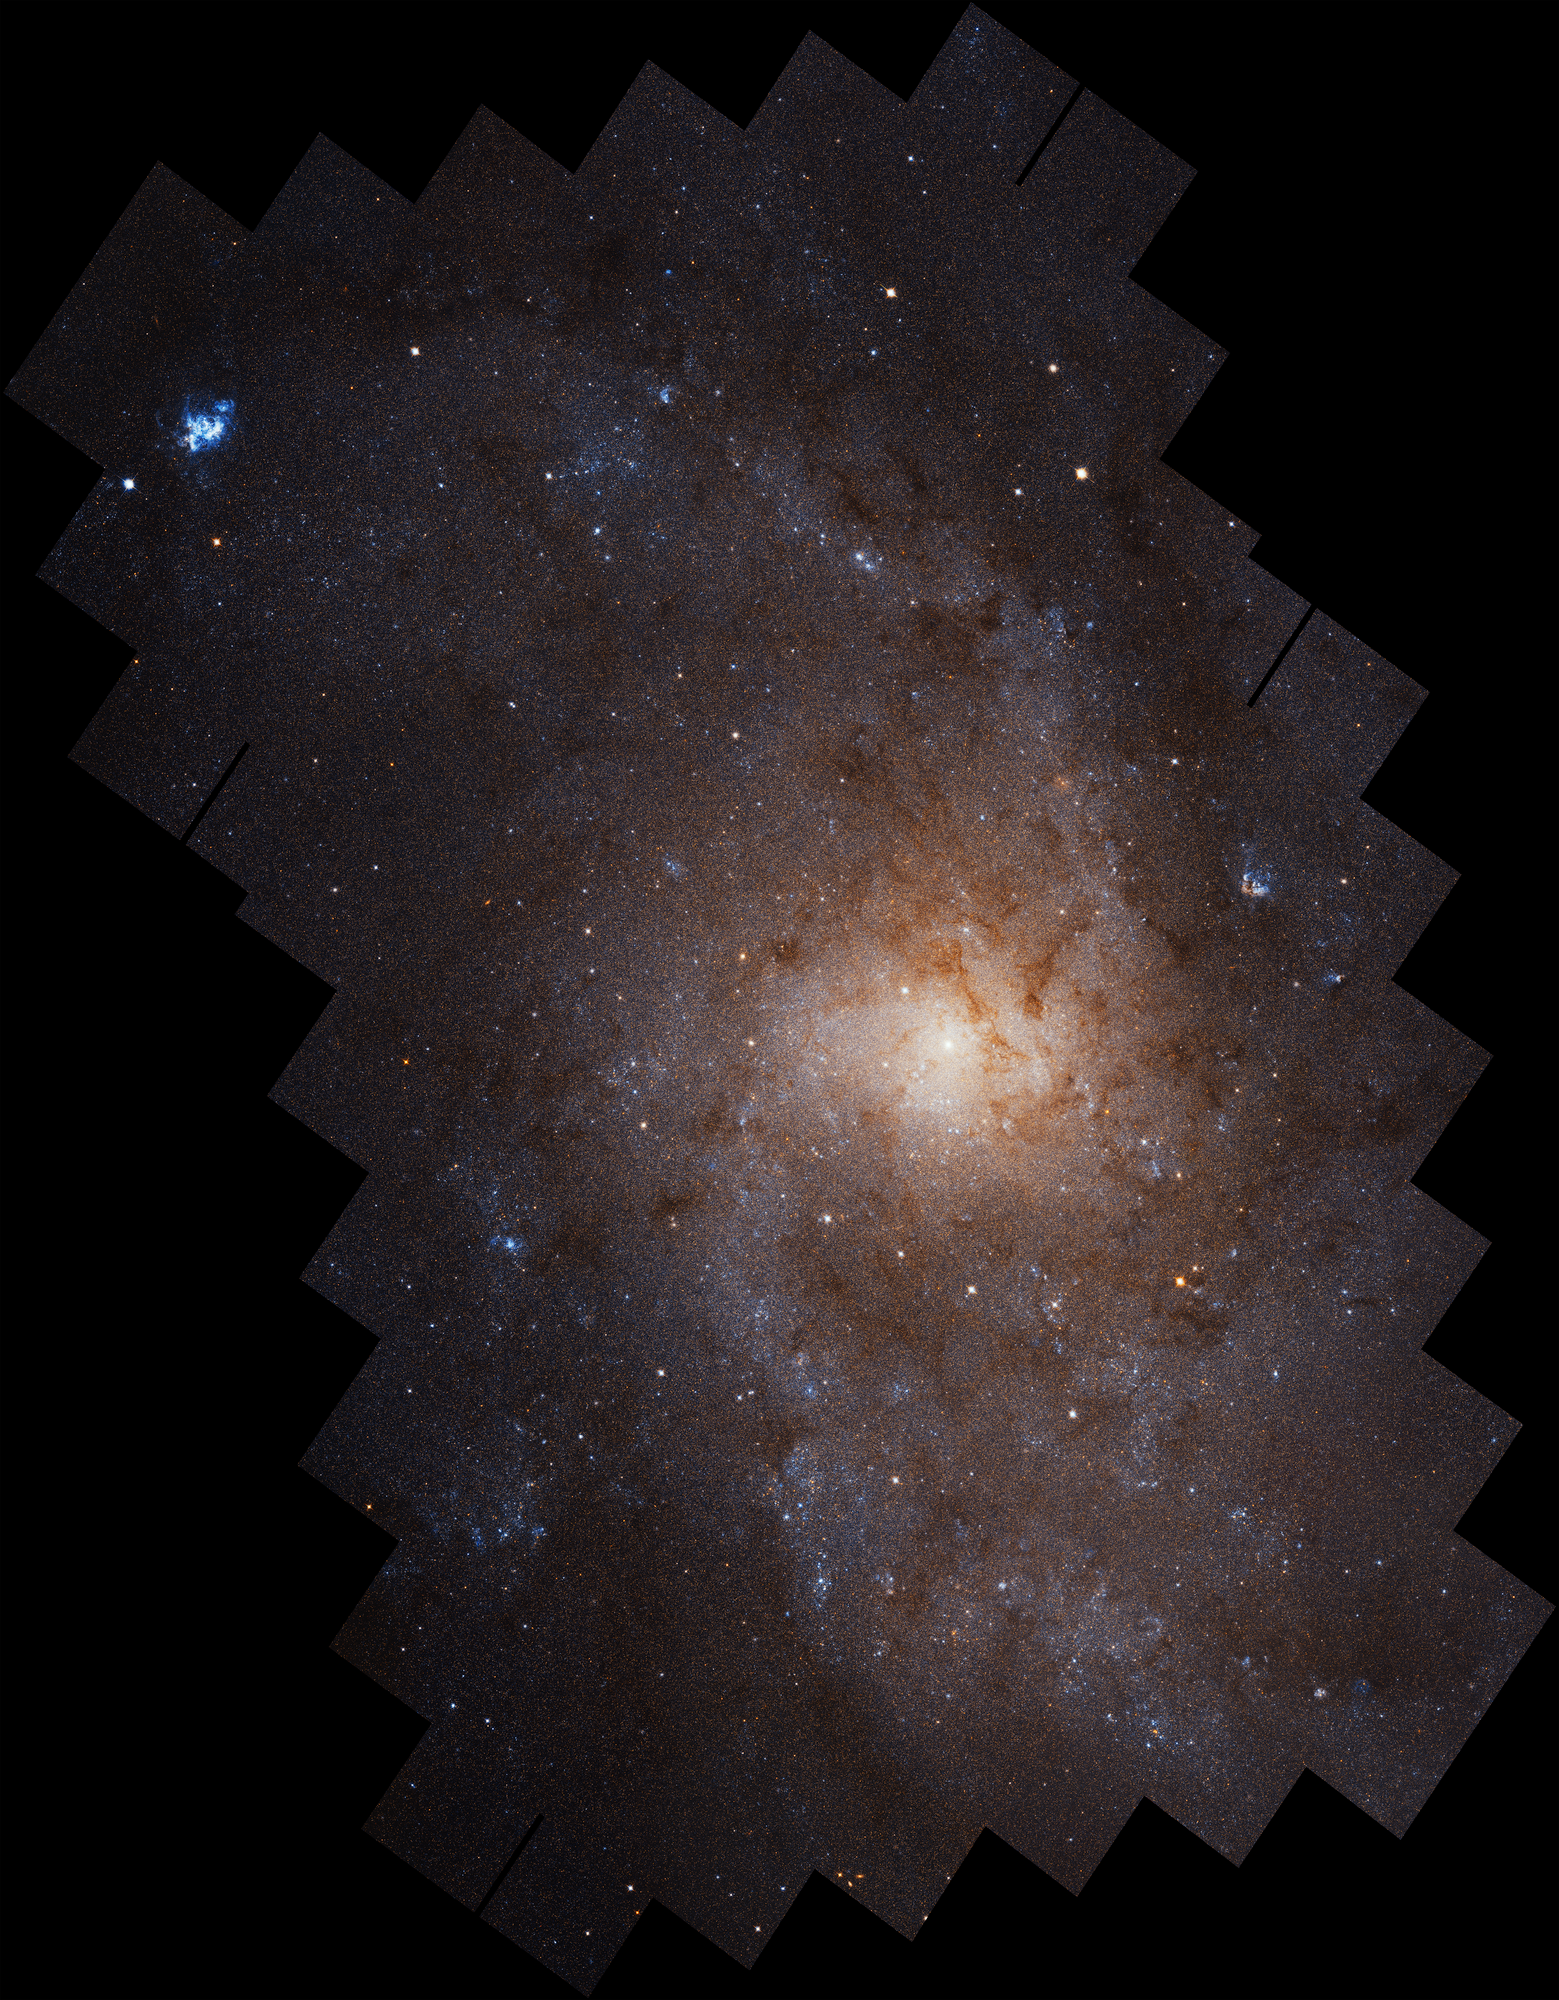 stair-stepped image of a galaxy on black background